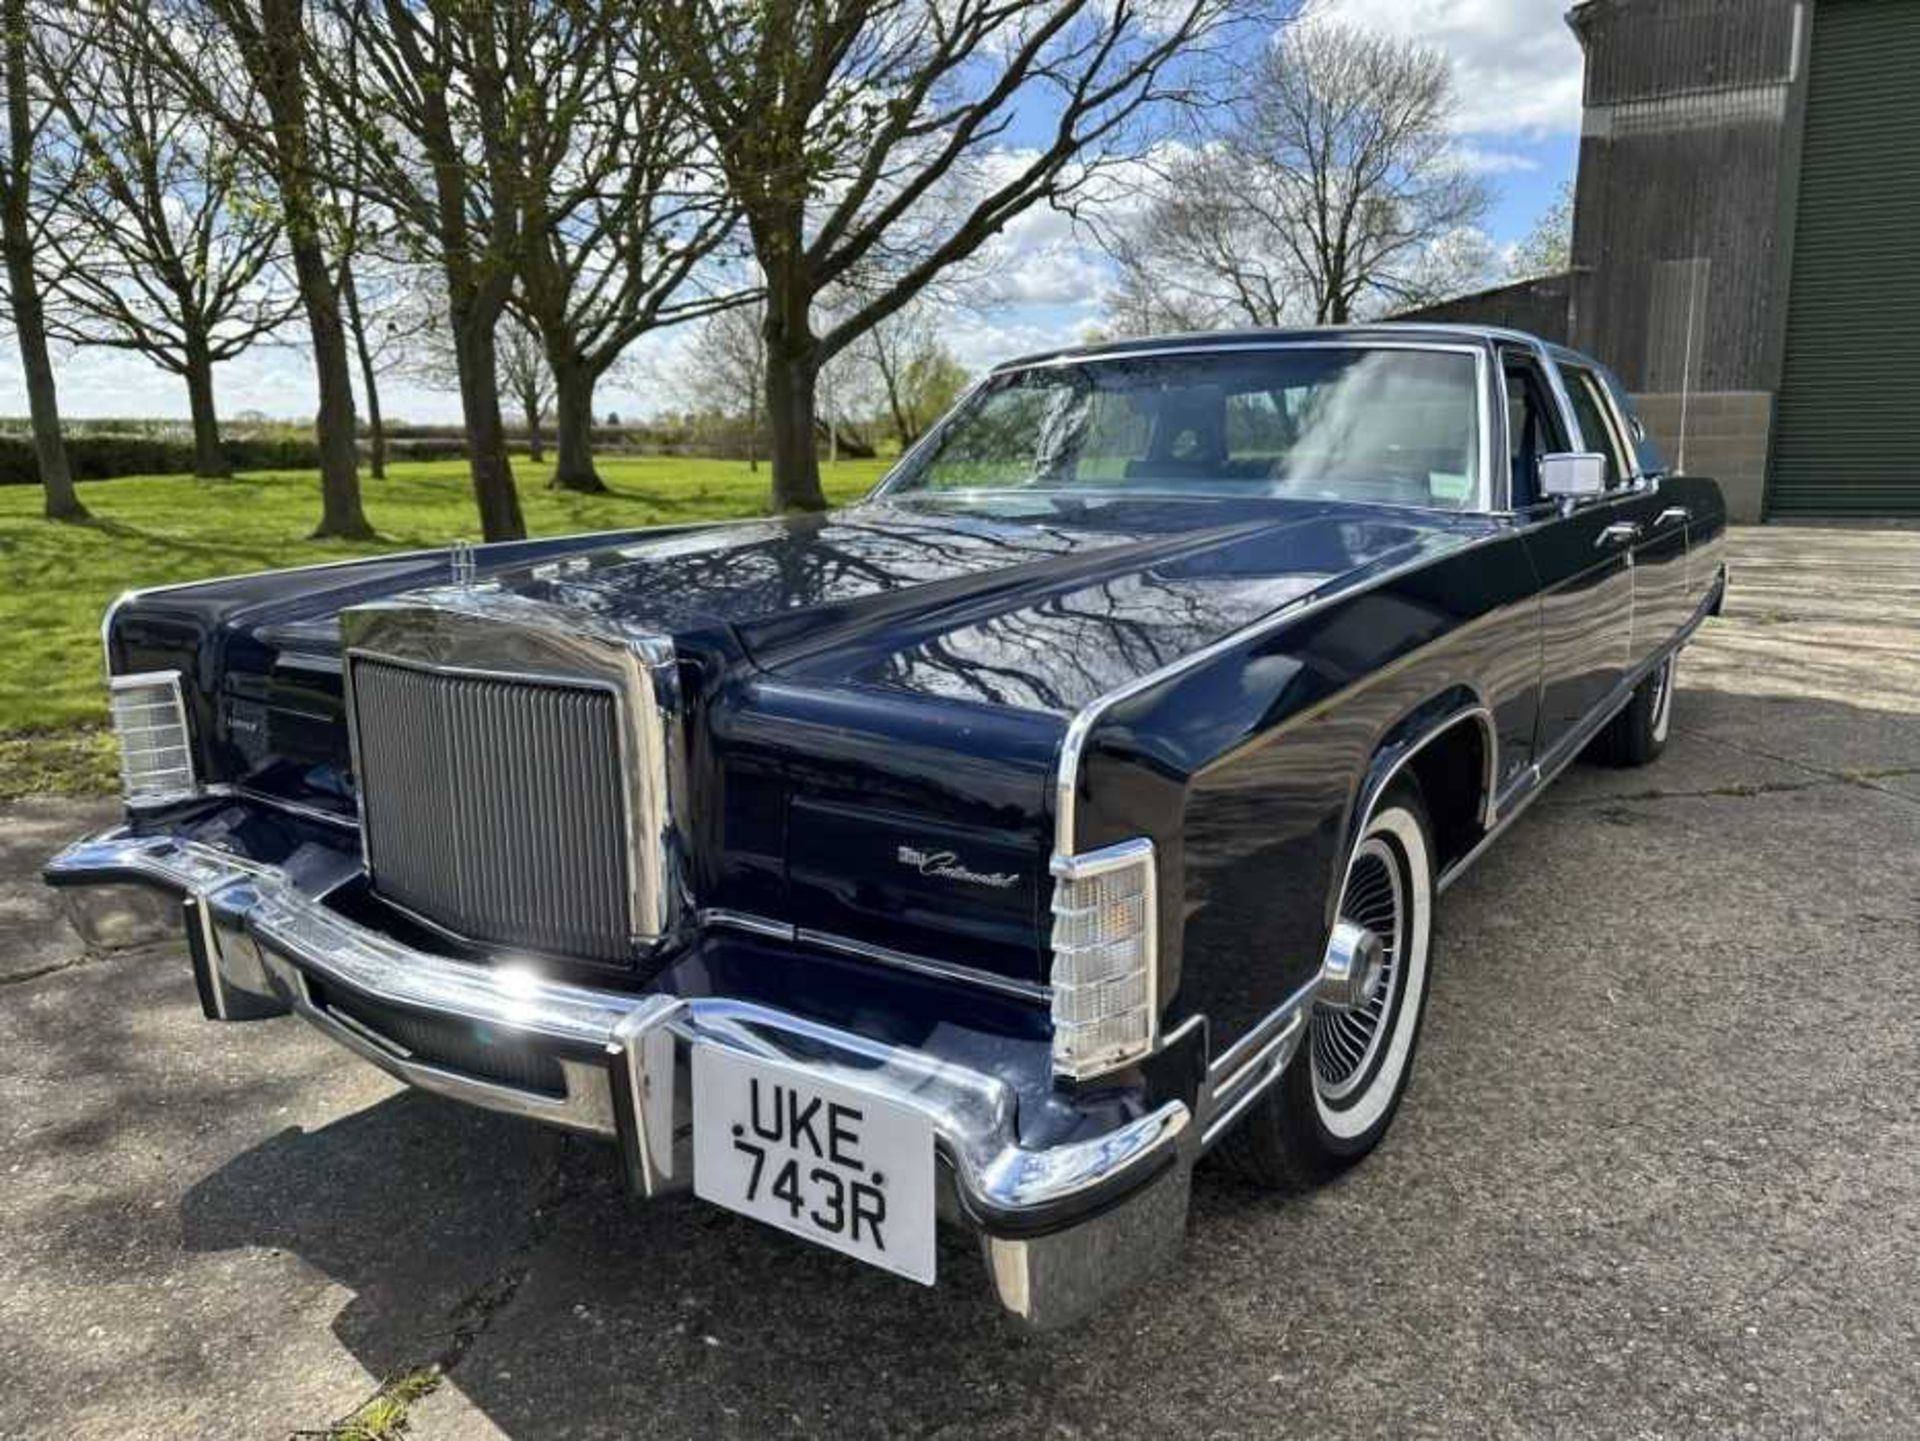 1977 Lincoln Continental Spitzer 4 door sedan, Registration UKE 743R. This very imposing classic Ame